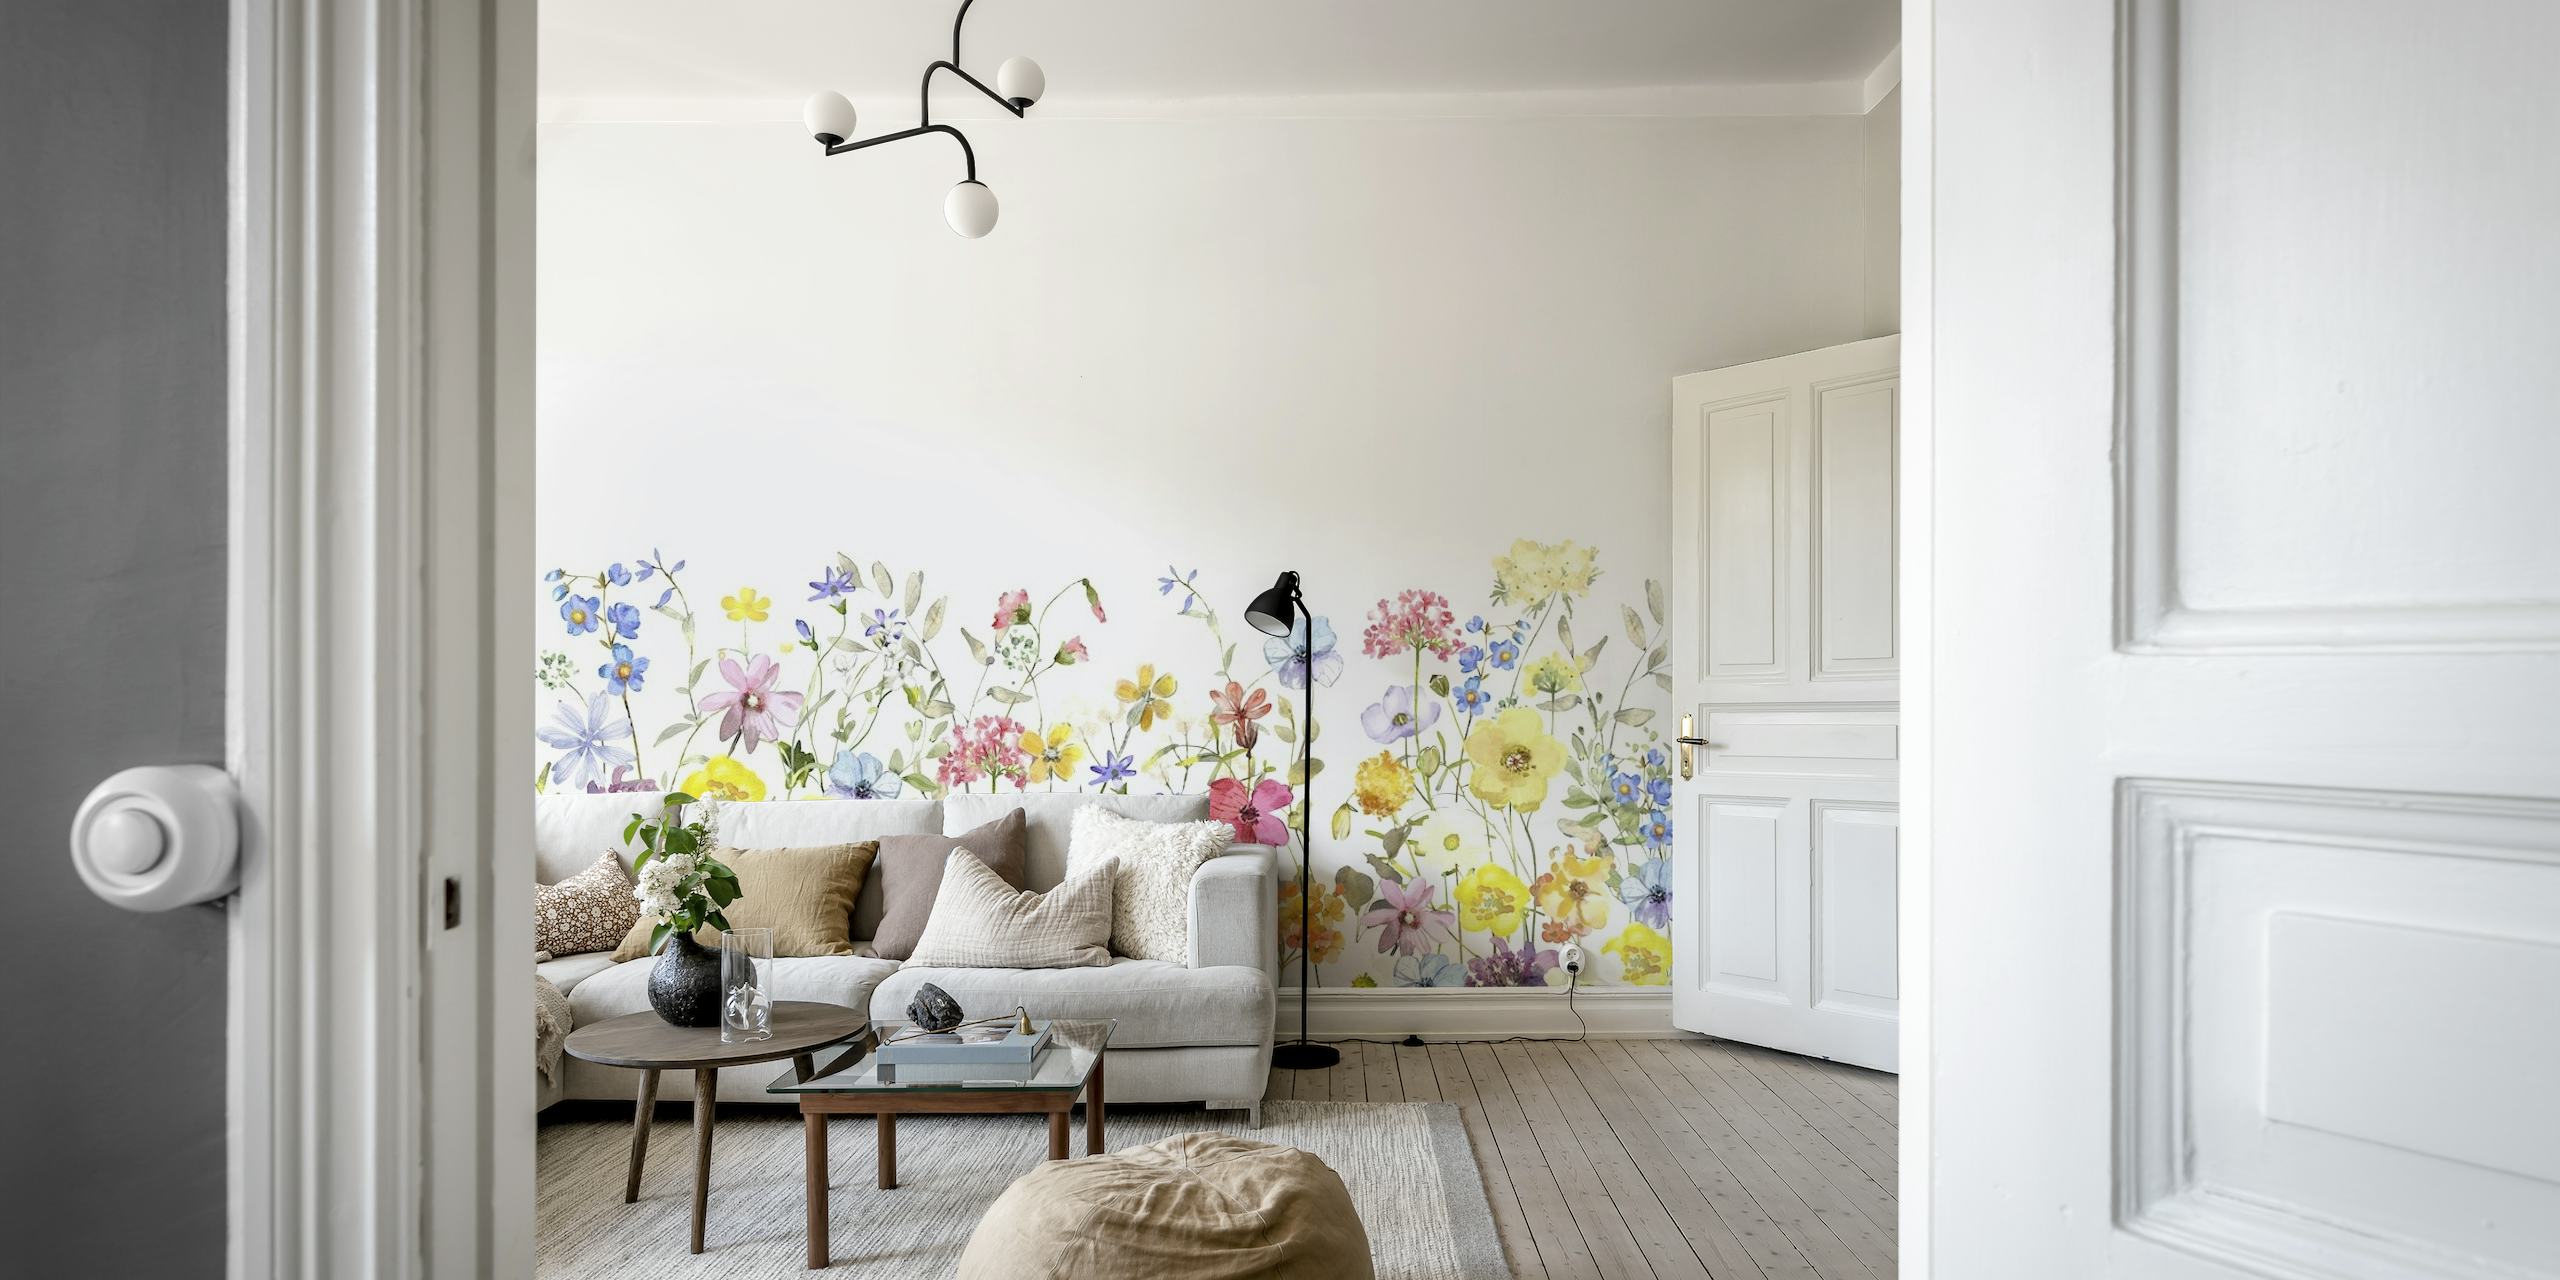 A lush display of varied wildflowers in a meadow wall mural